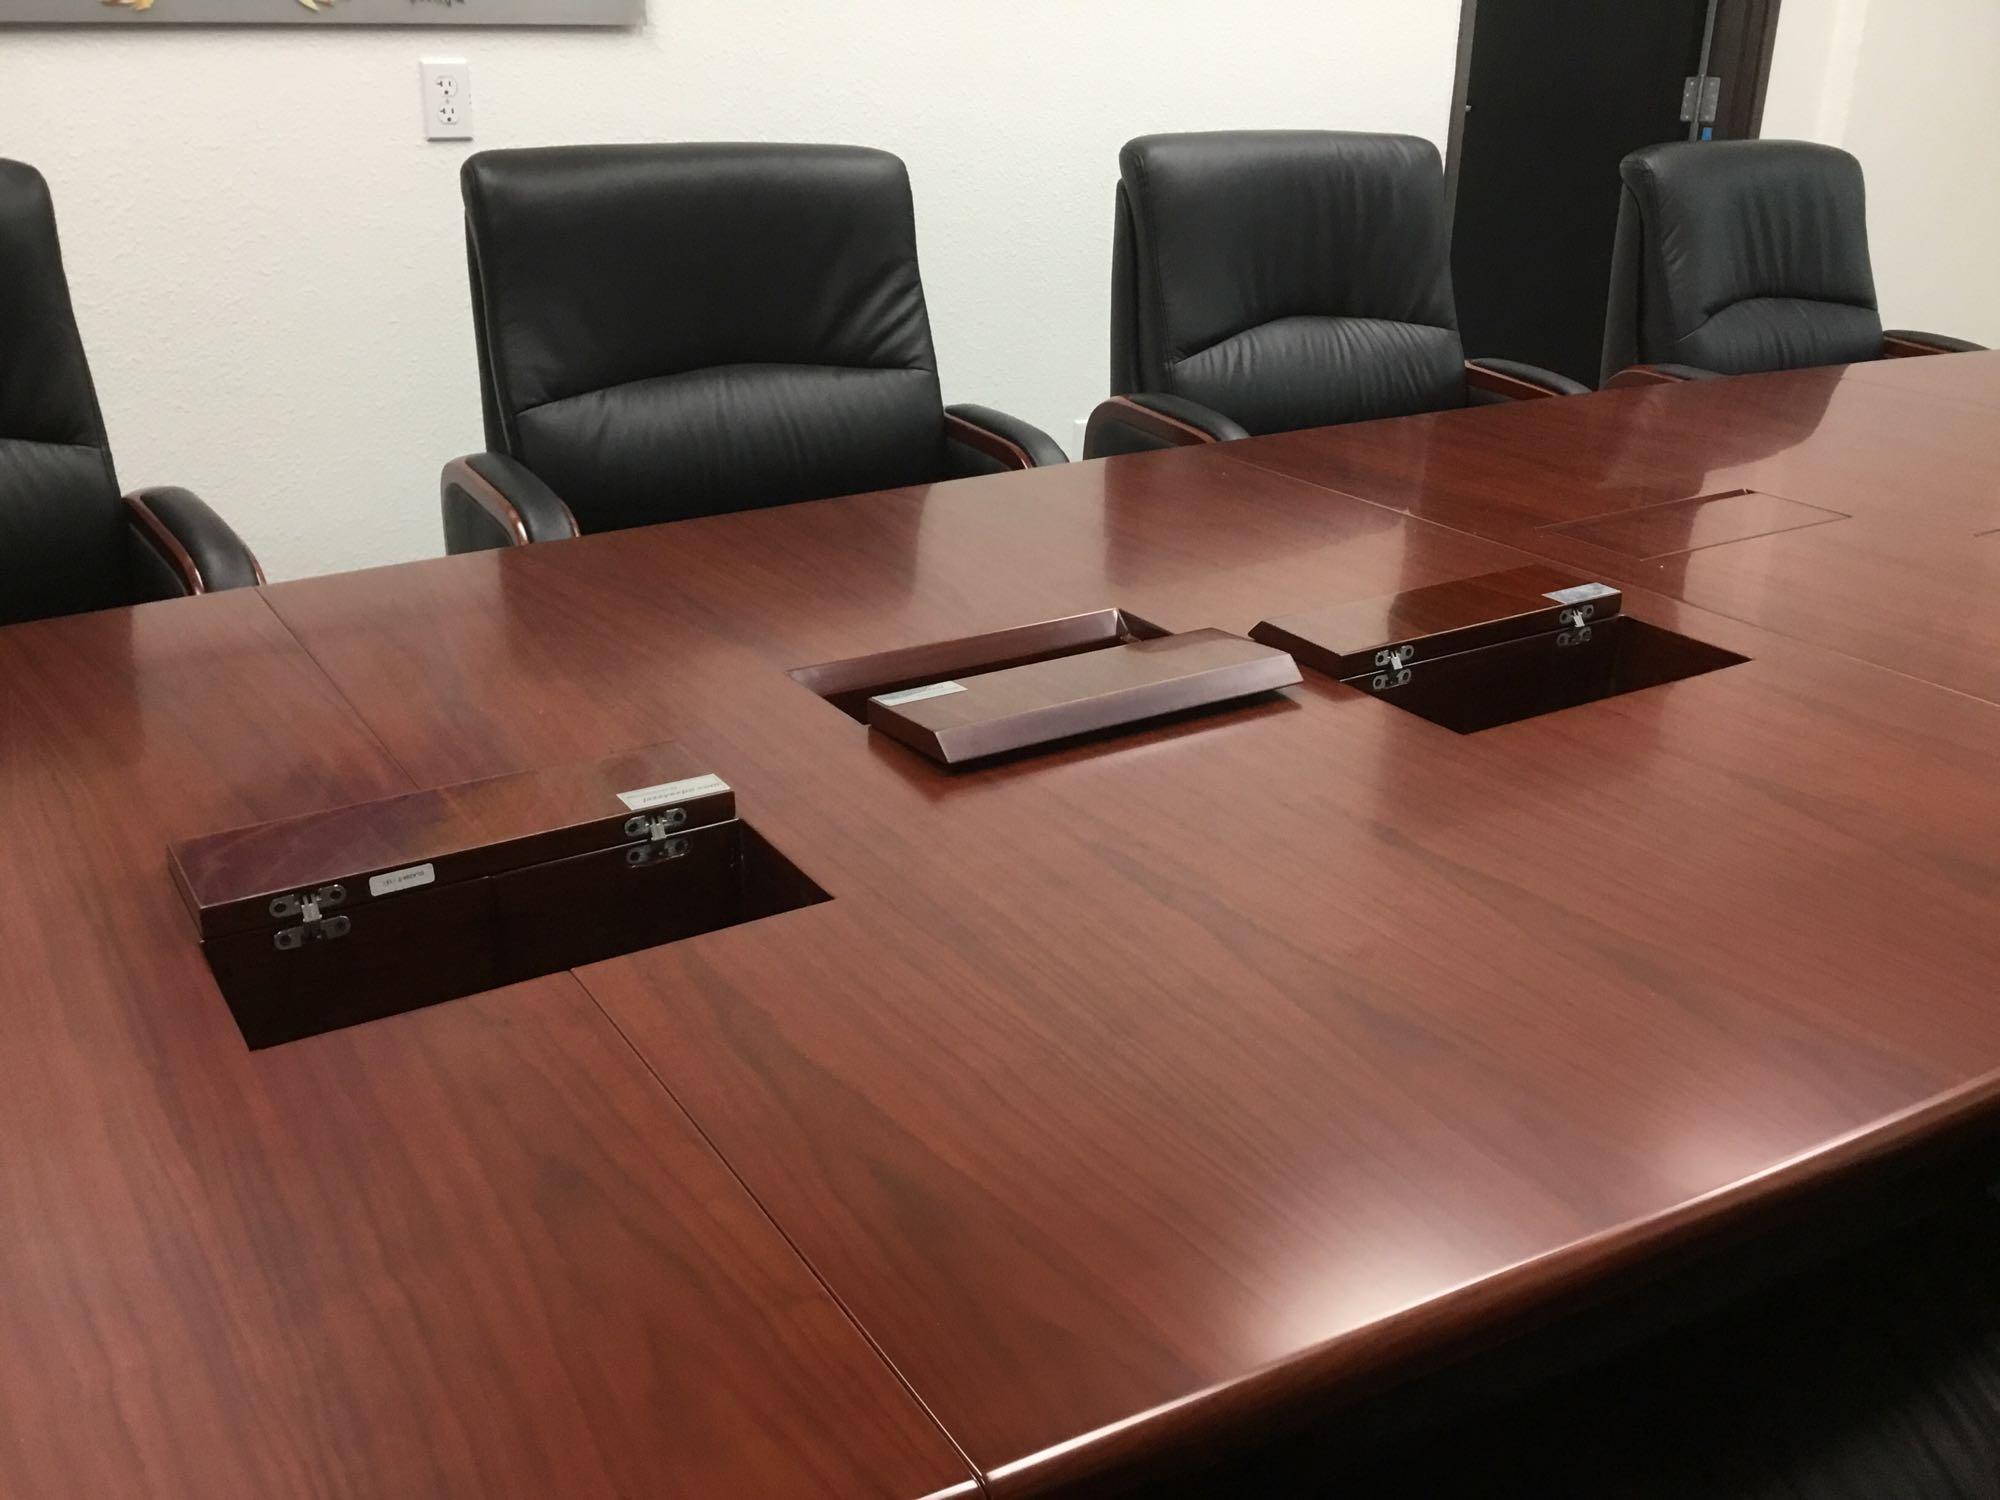 14ft. Los Angeles Conference Table, 10 Mid-Back Chairs and 2 drawer stand alone locking cabinet